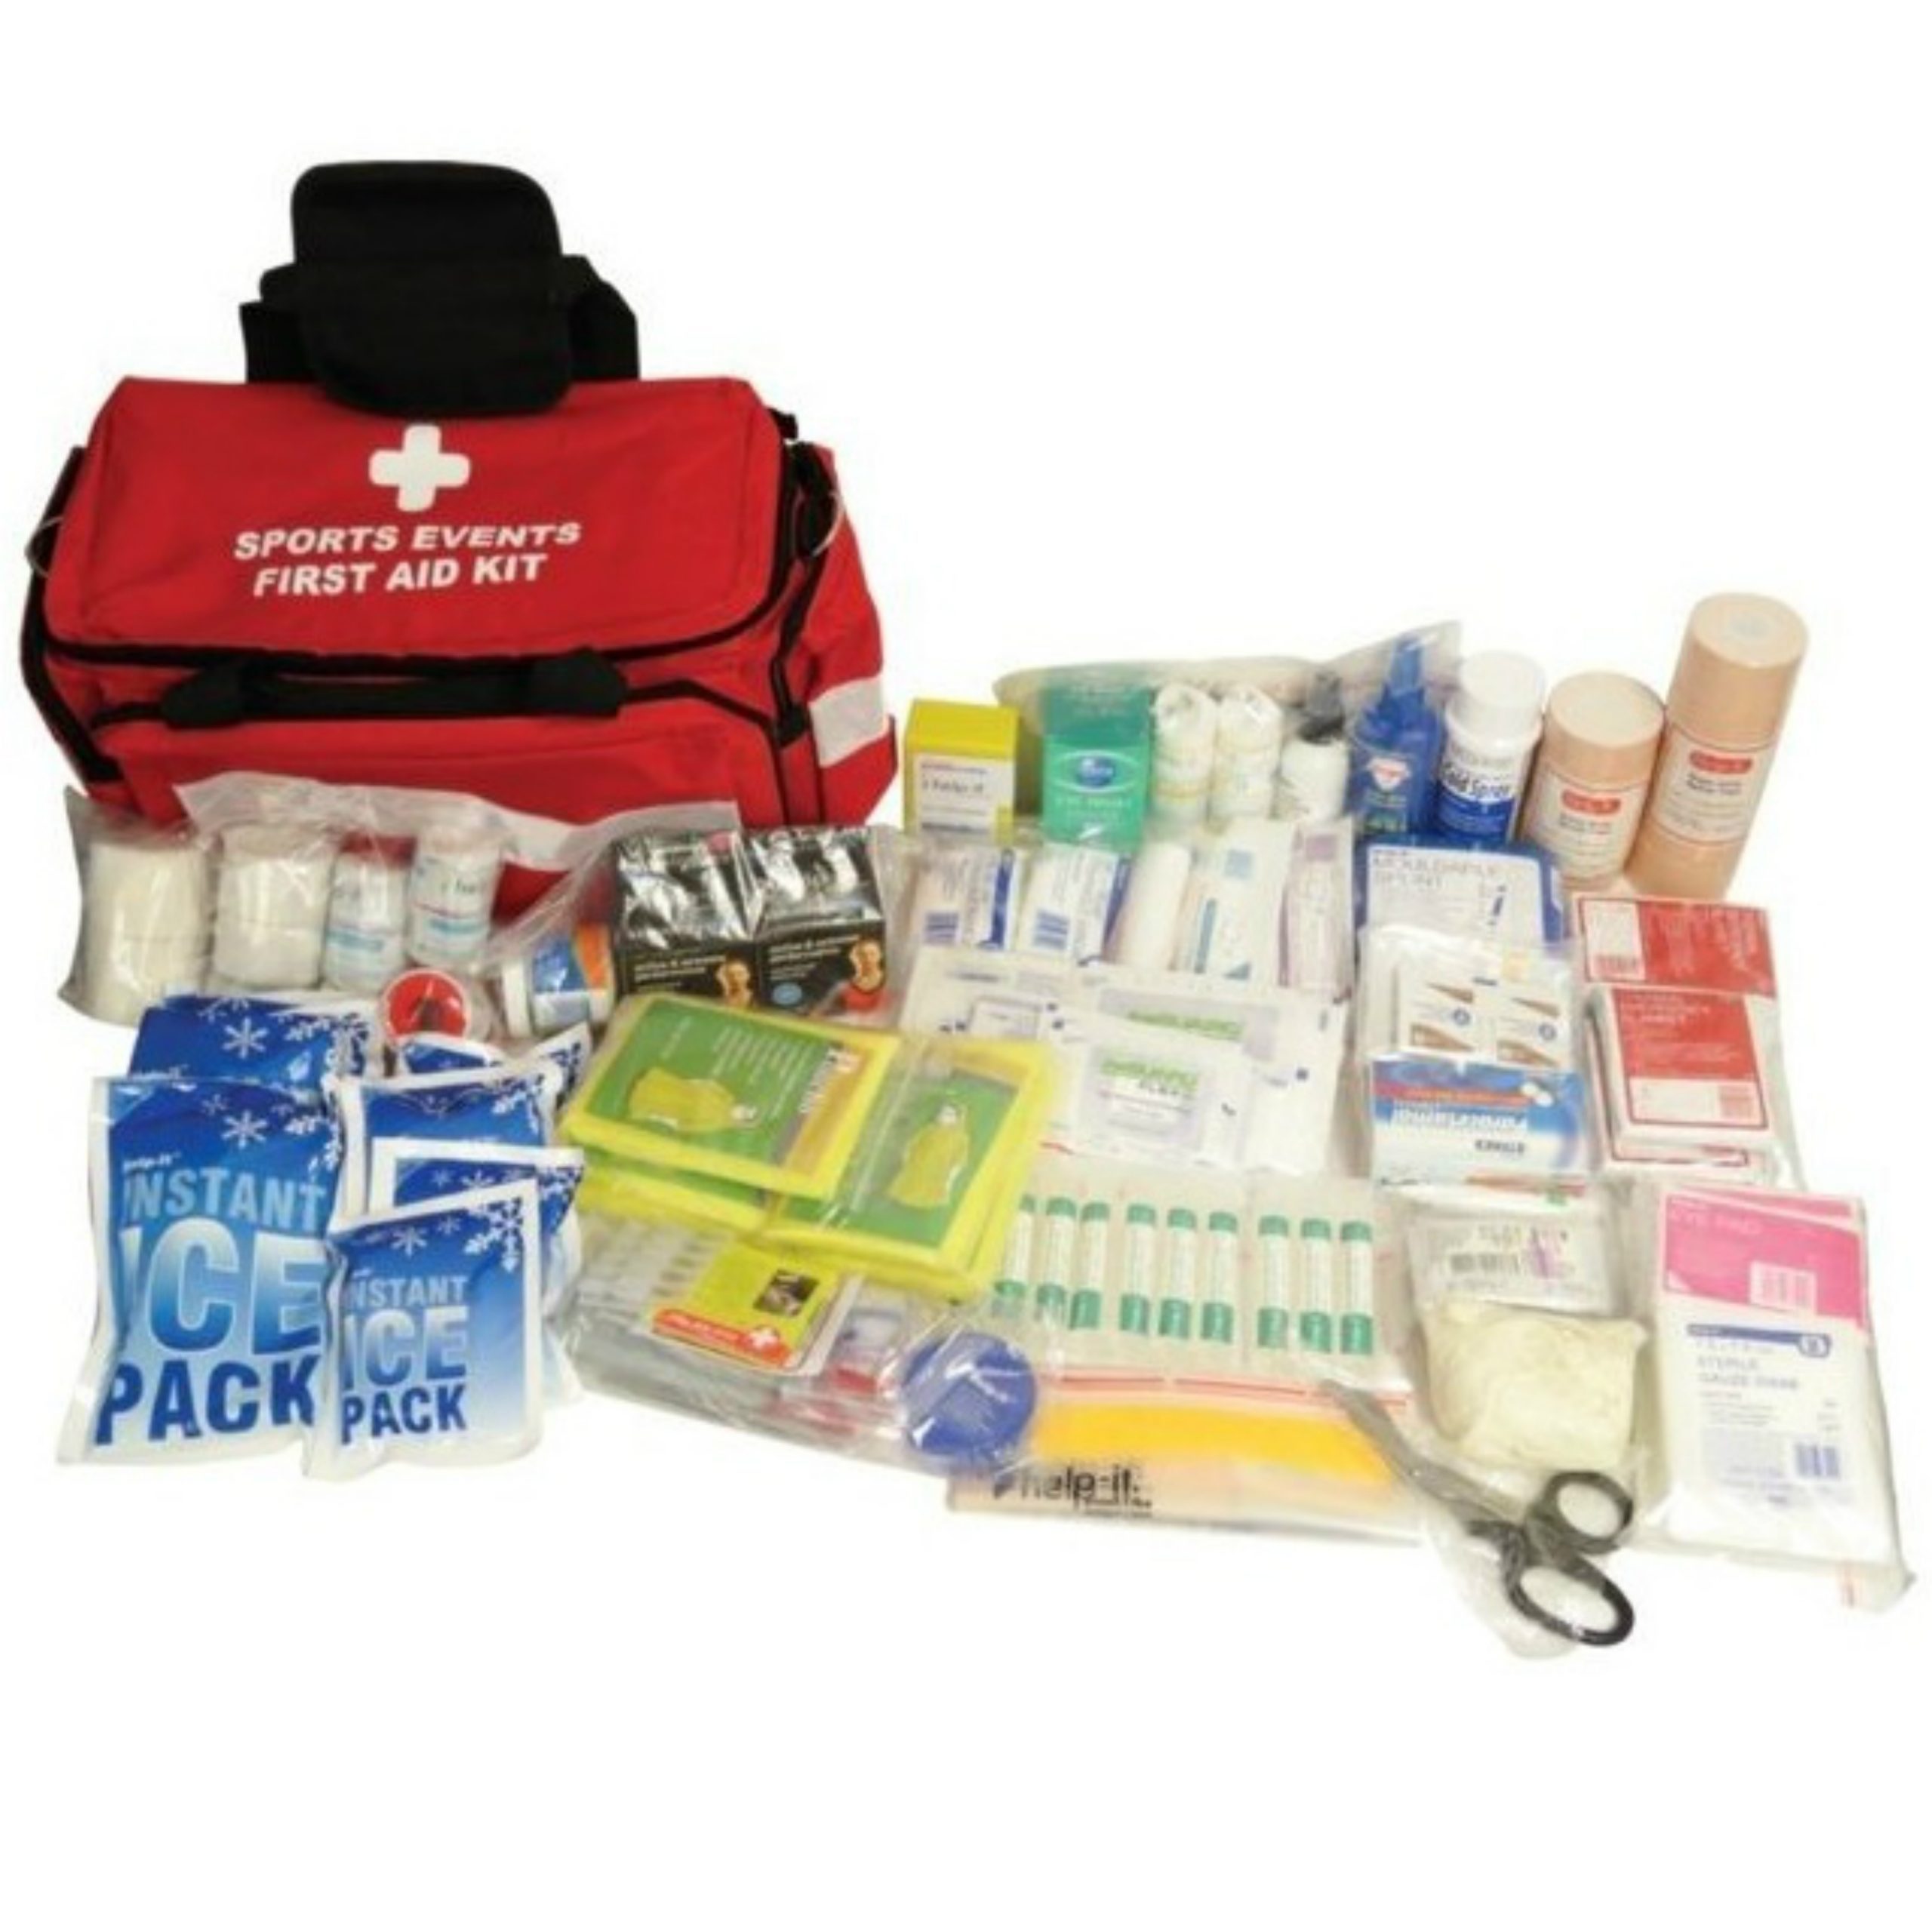 10 essential items for your sports first aid kit, Medibc Blog